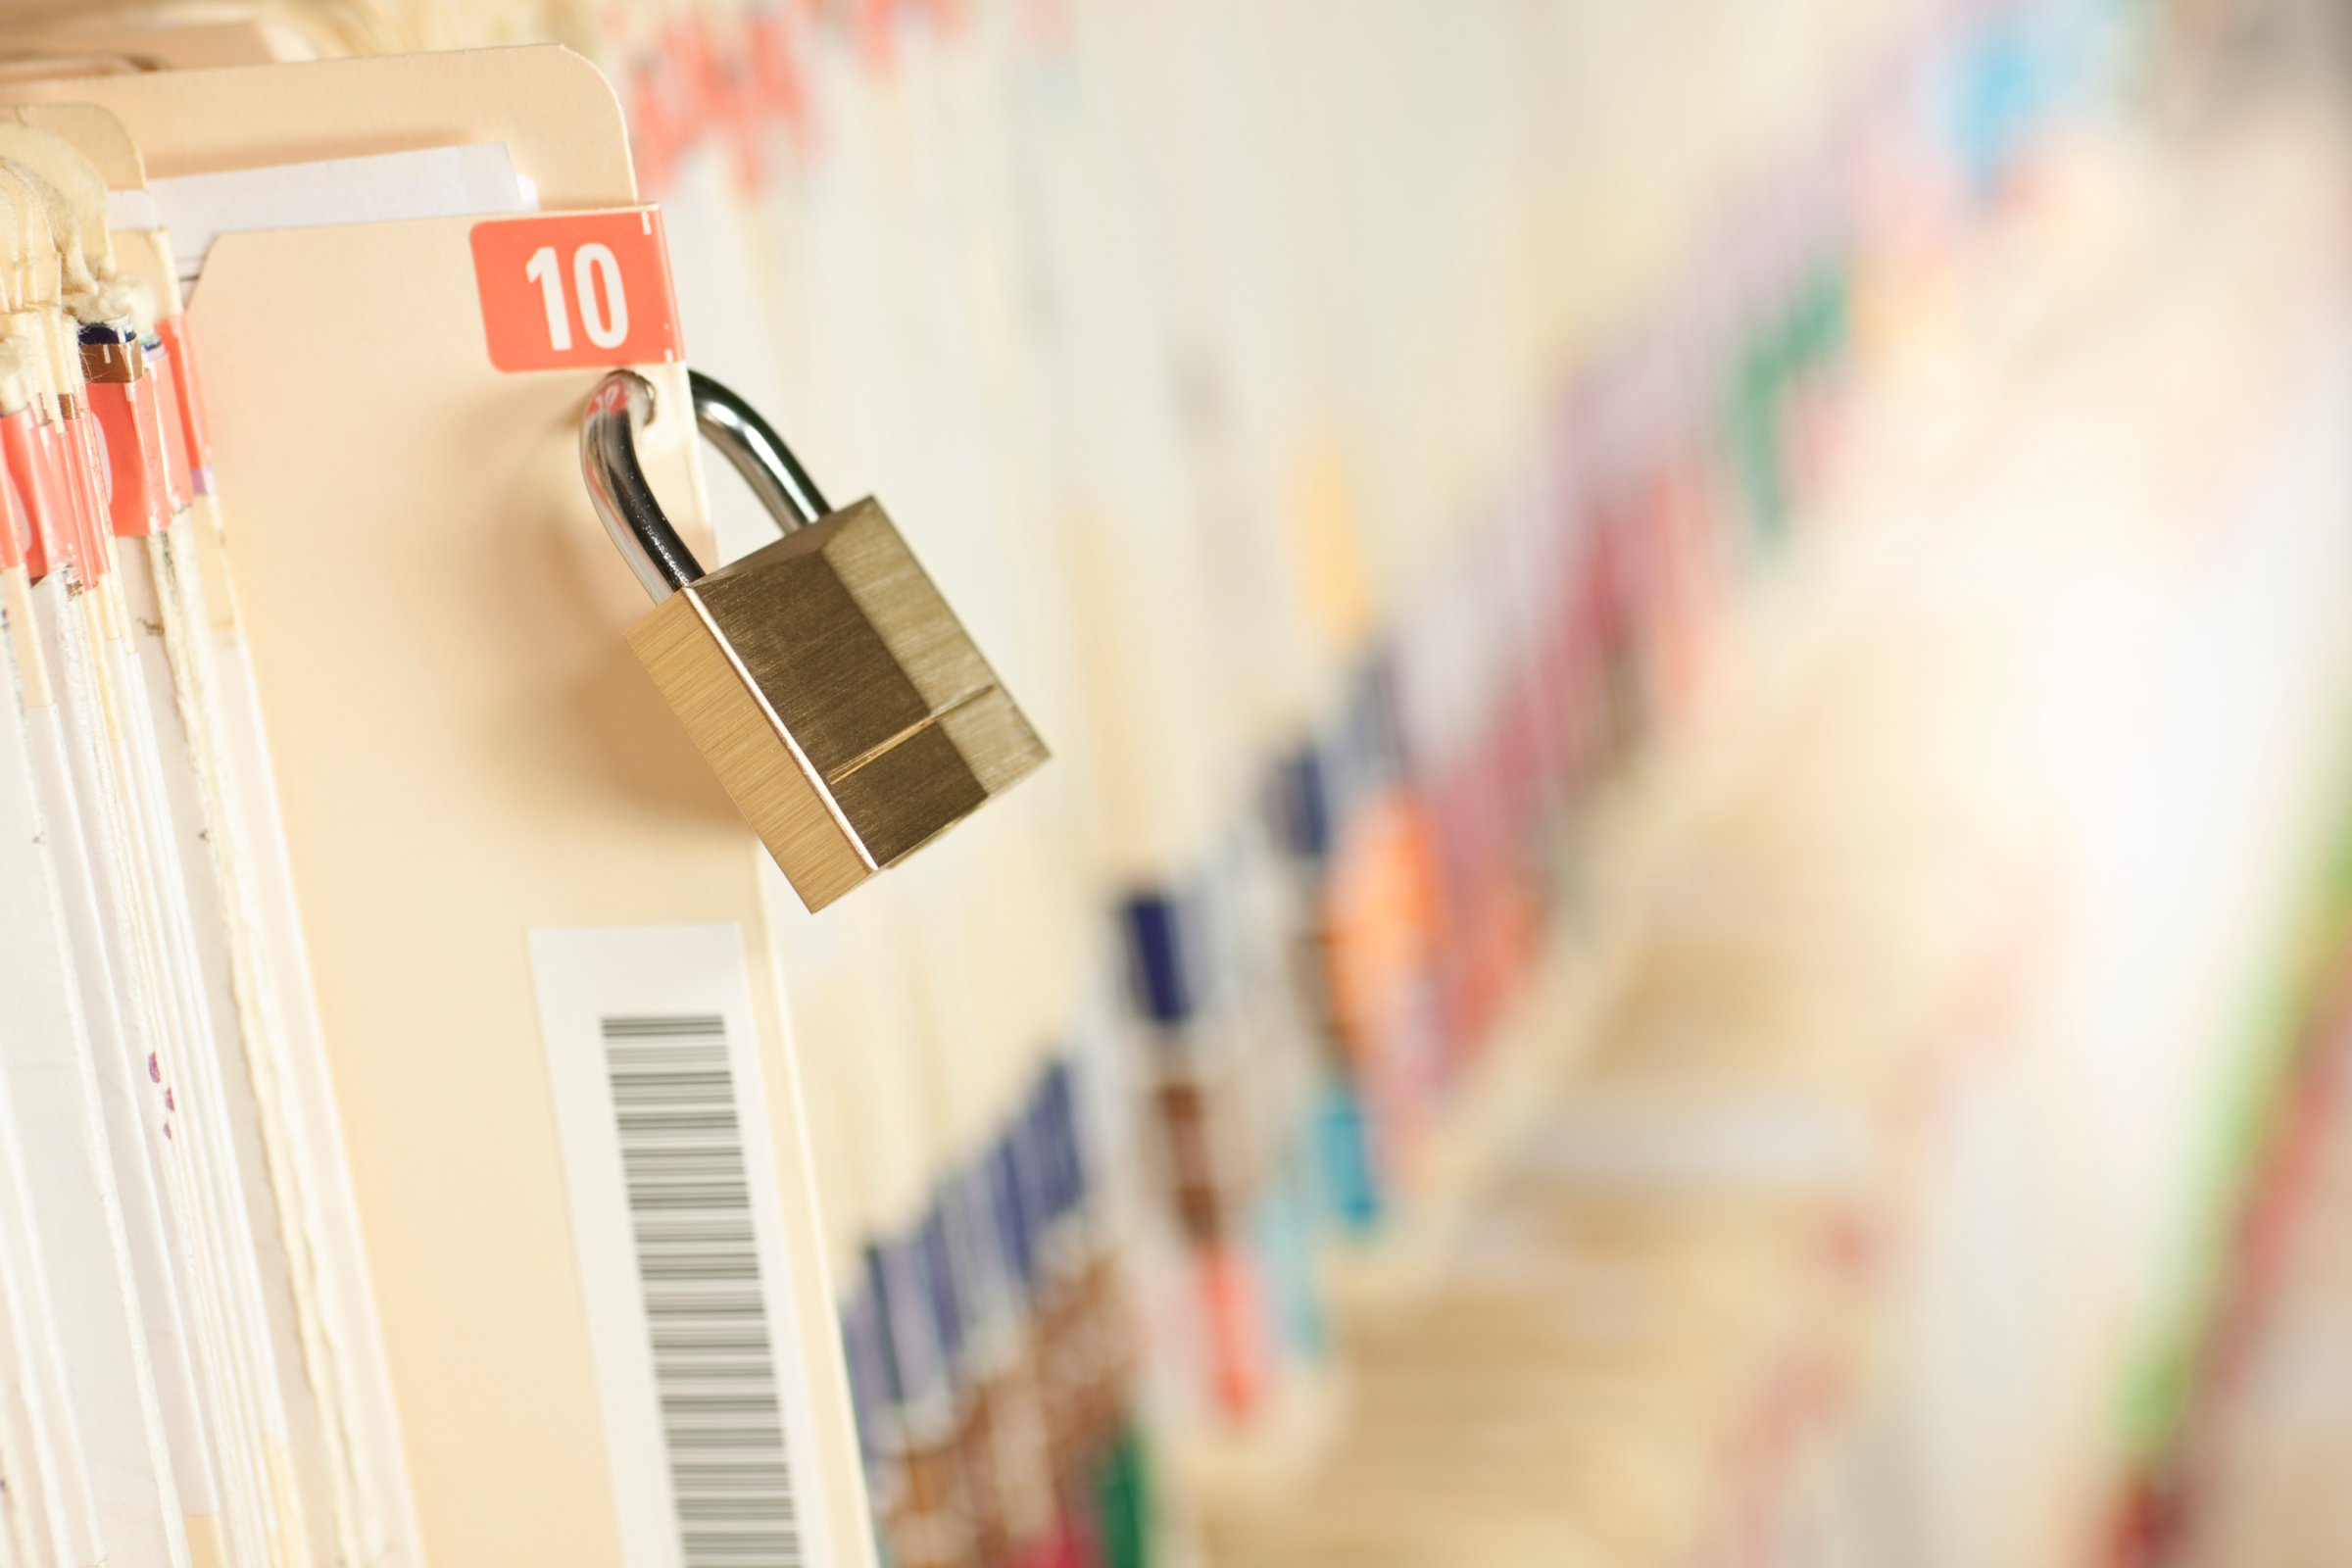 A row of medical records with a lock on one of the files.